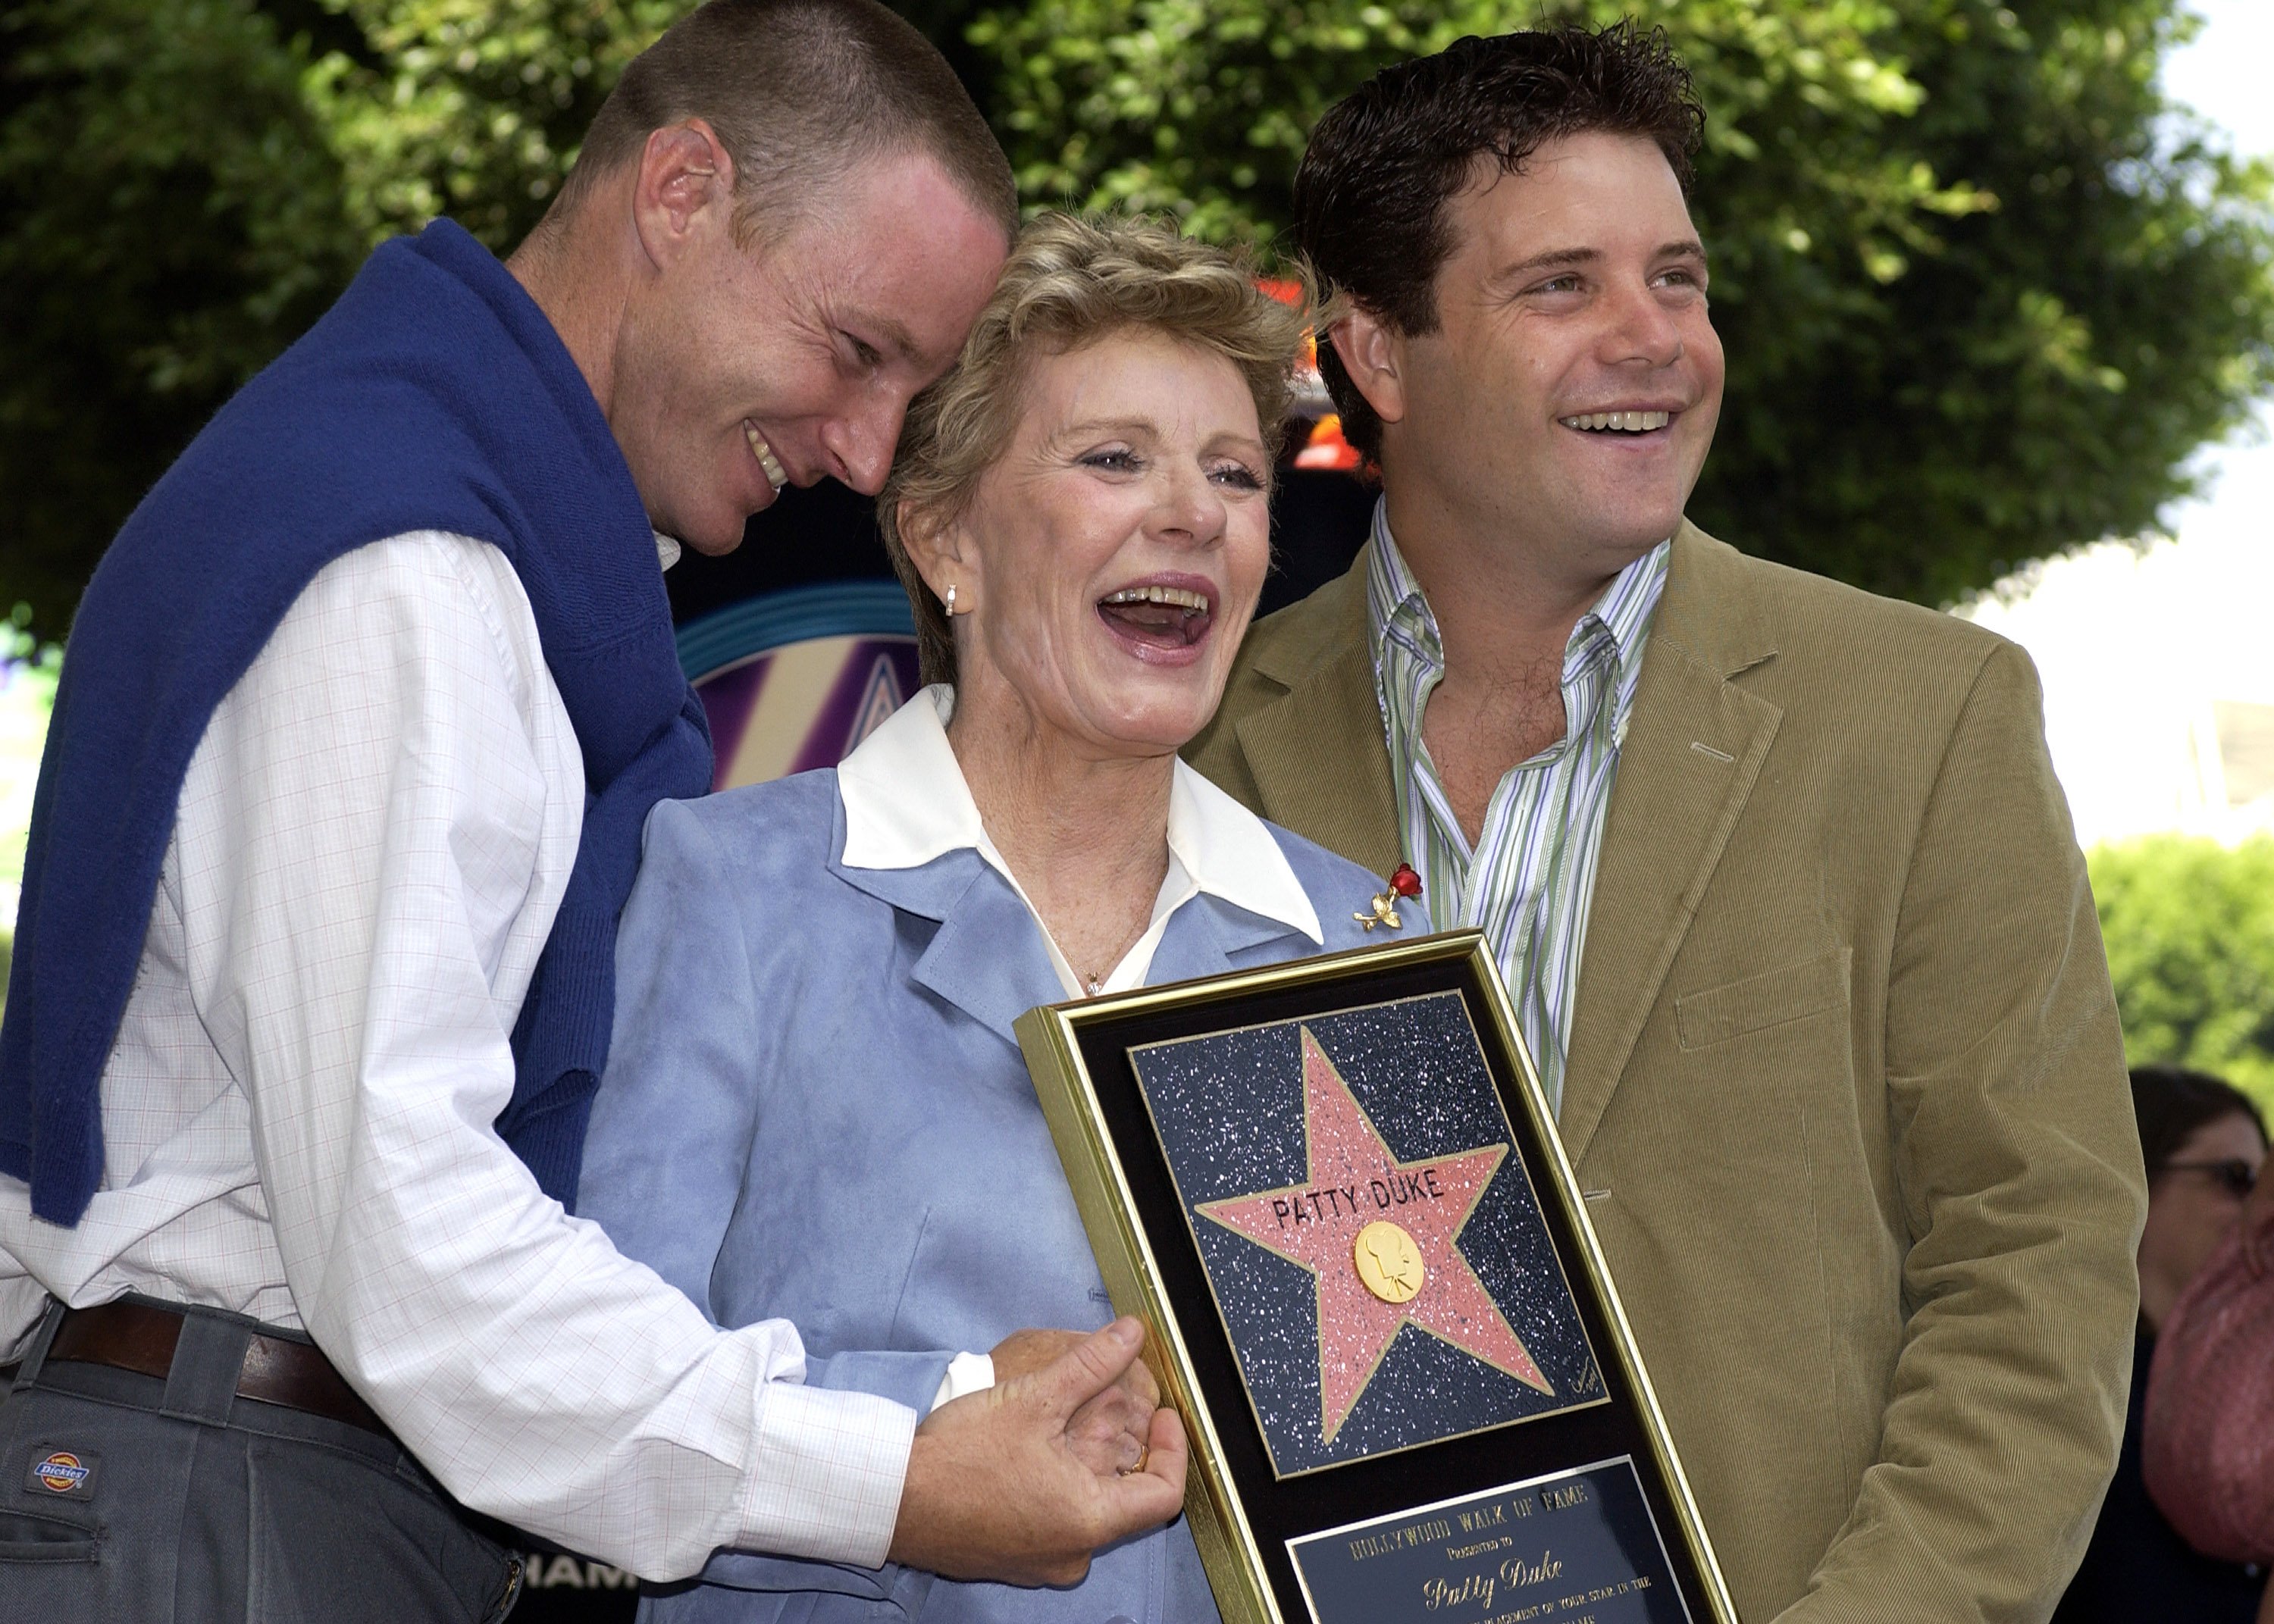 Patty Duke and sons MacKenzie (L) and Sean Astin attend the ceremony honoring her with a star on the Hollywood Walk of Fame August 17, 2004 in Hollywood, California. Photo: Getty Images